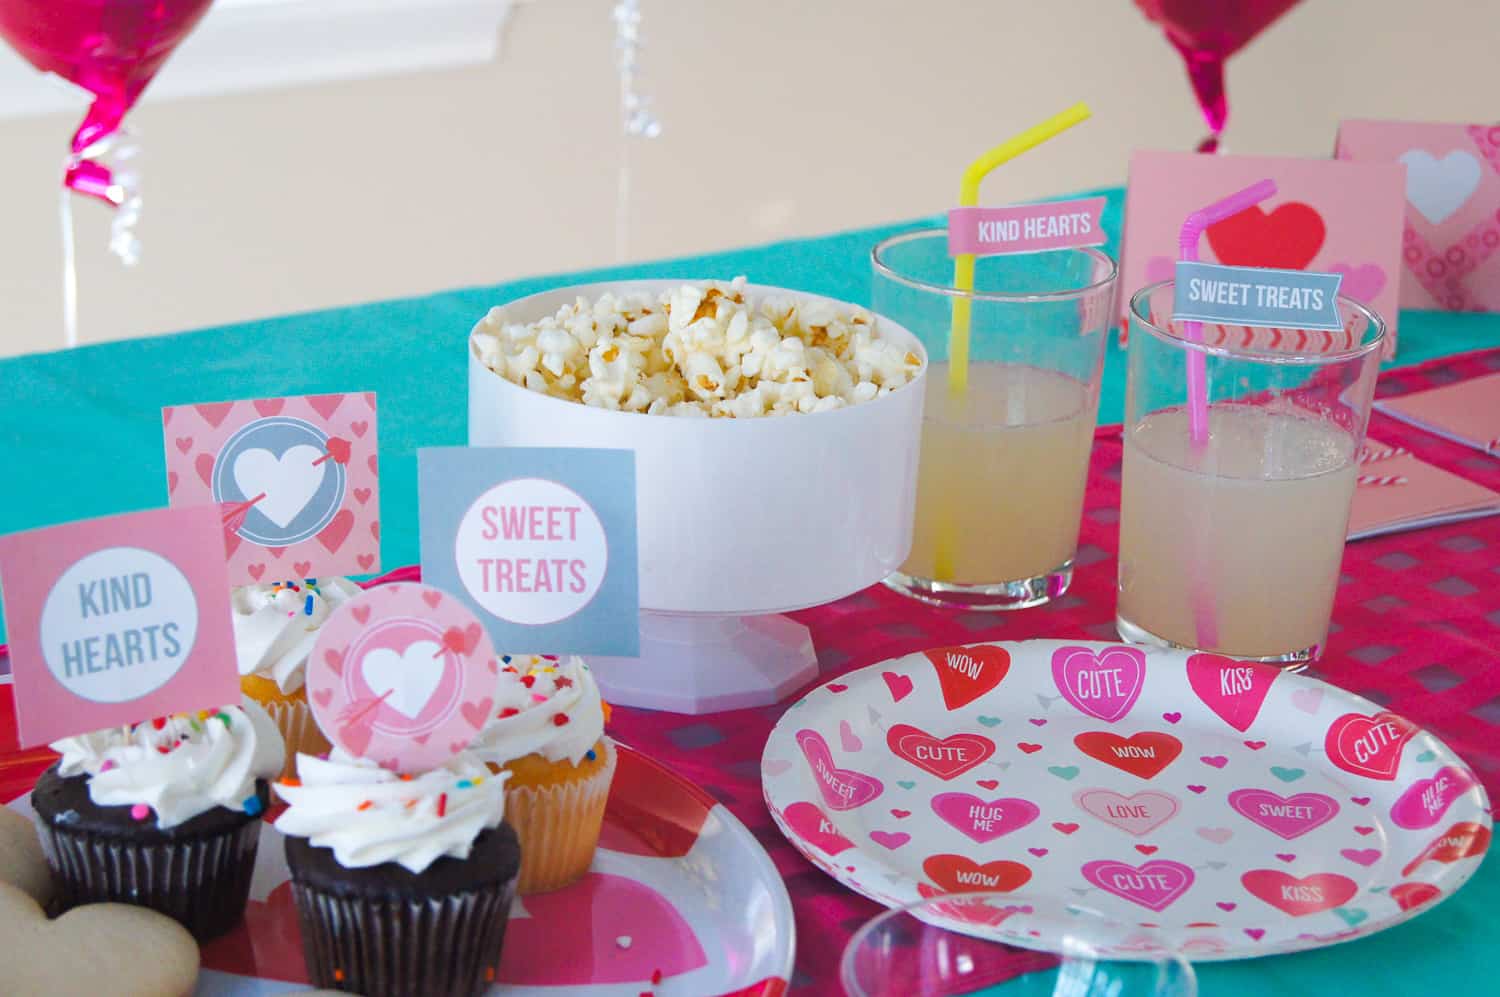 Sweet Treats + Kind Hearts Play Date Party Food